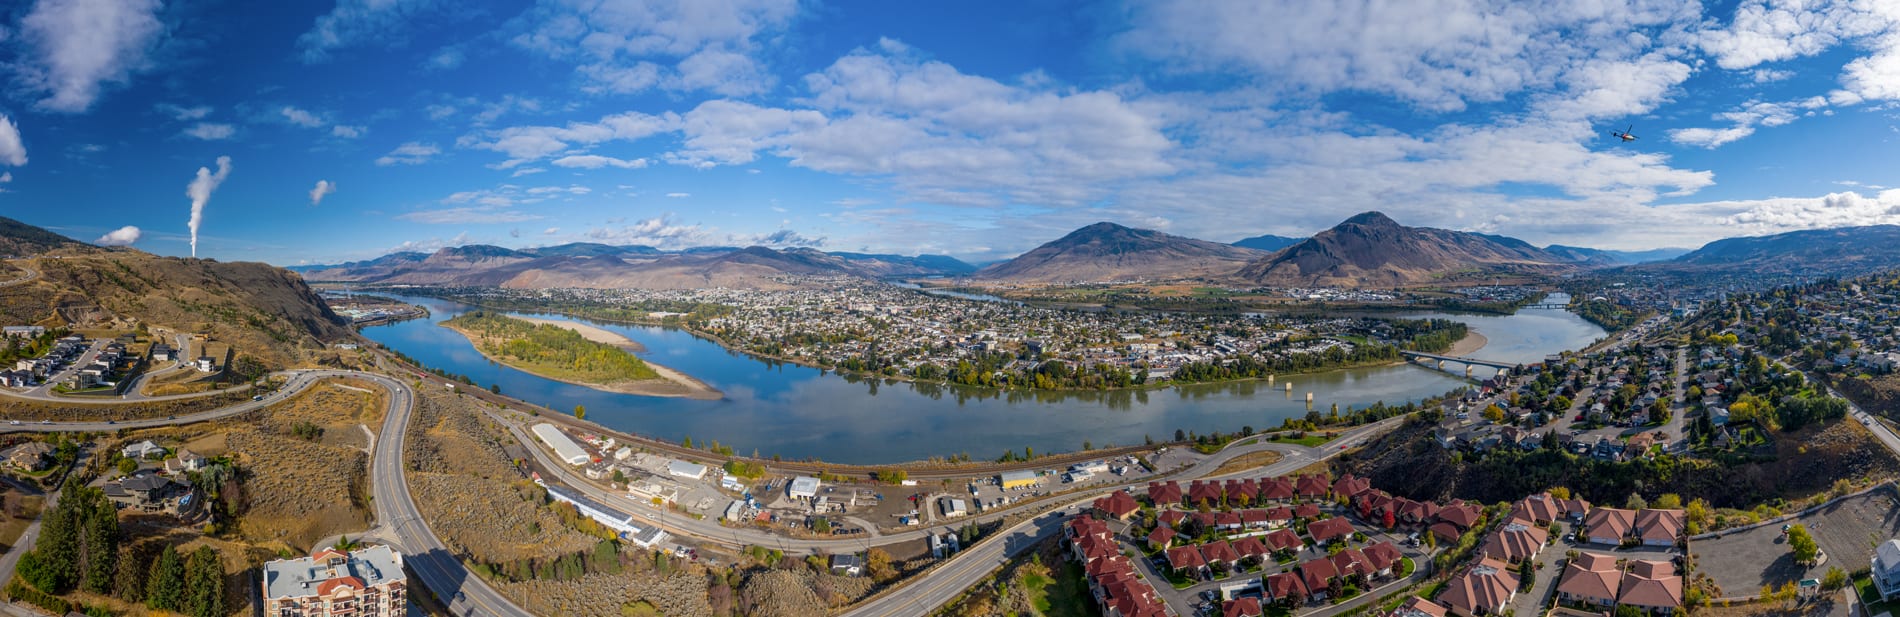 Kamloops City Aerial view of city with trees and mountain with river